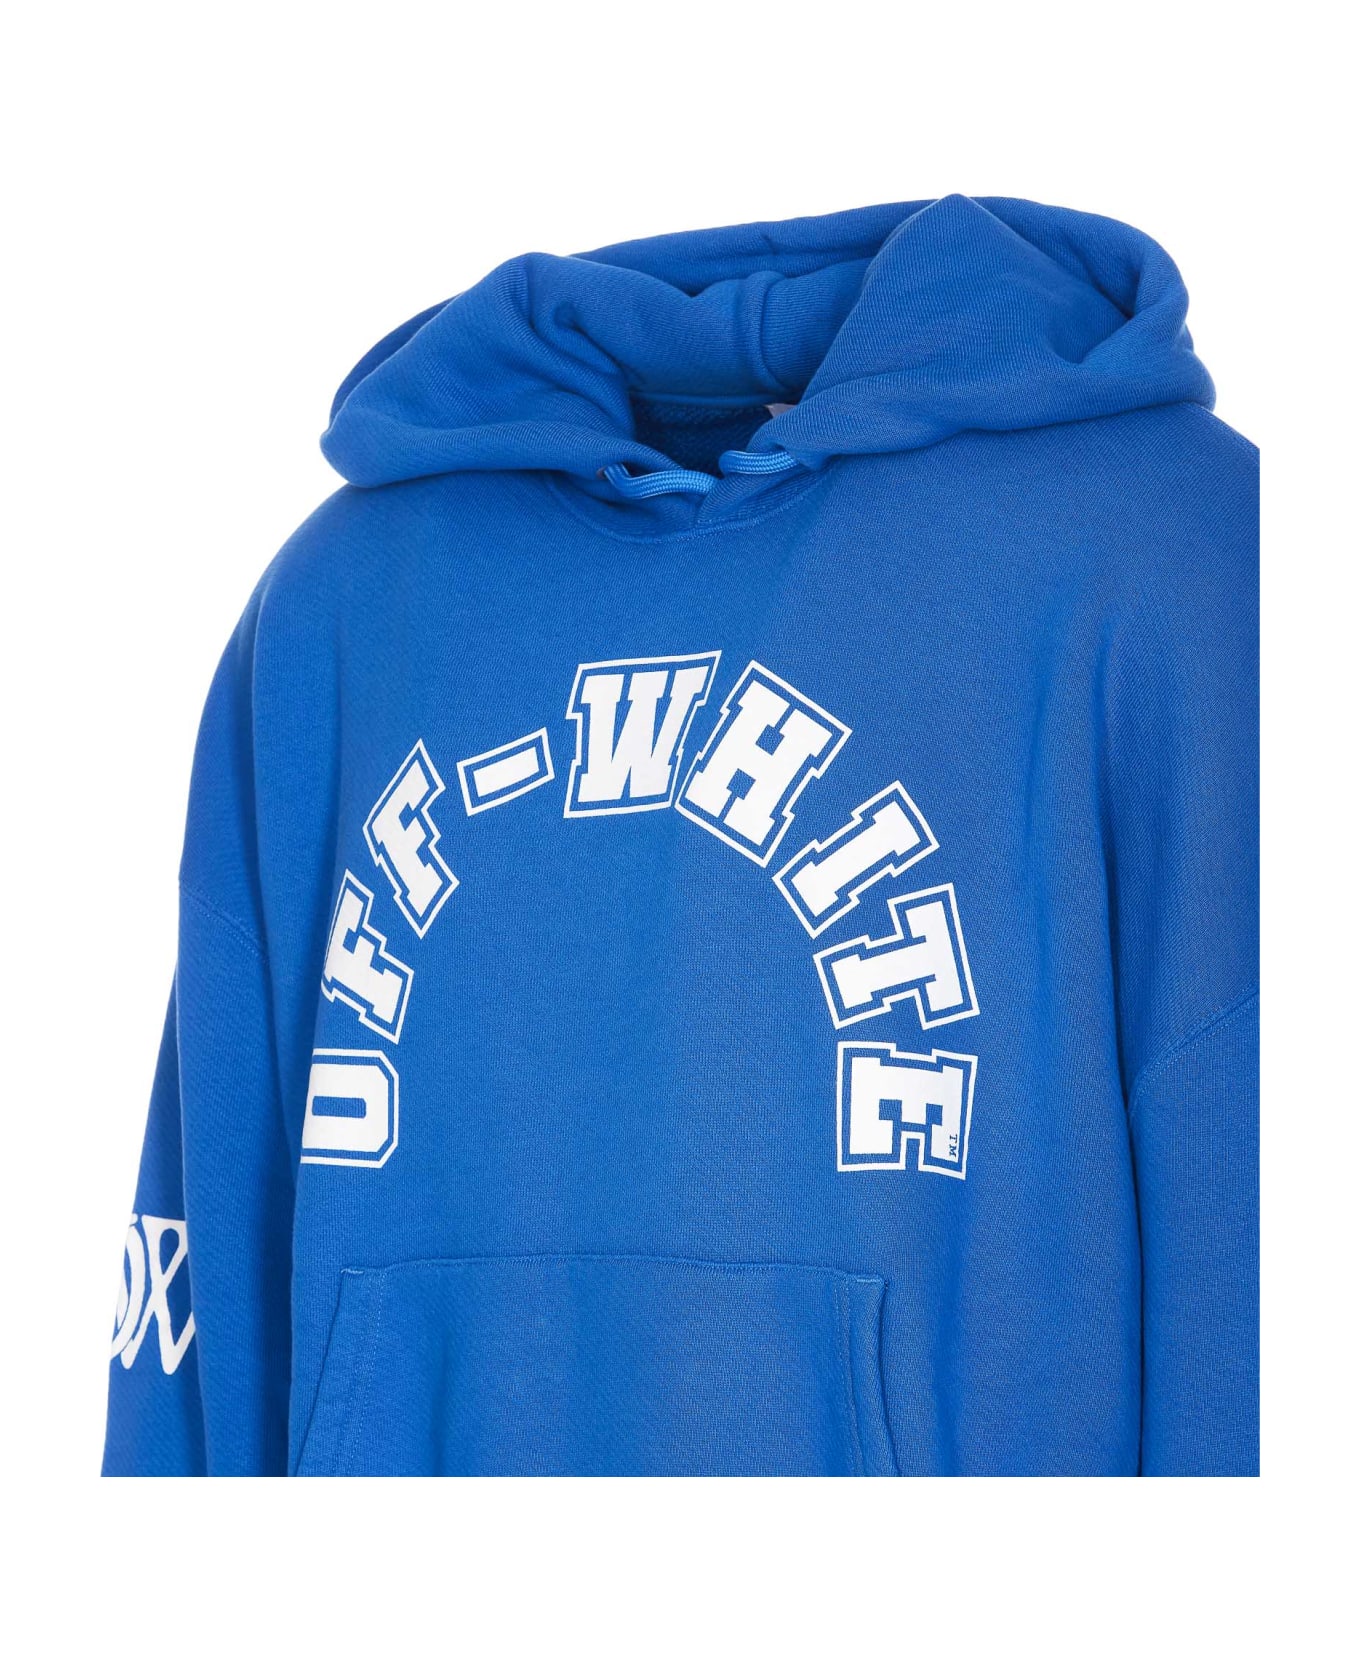 Off-White Football Over Hoodie - BLUE